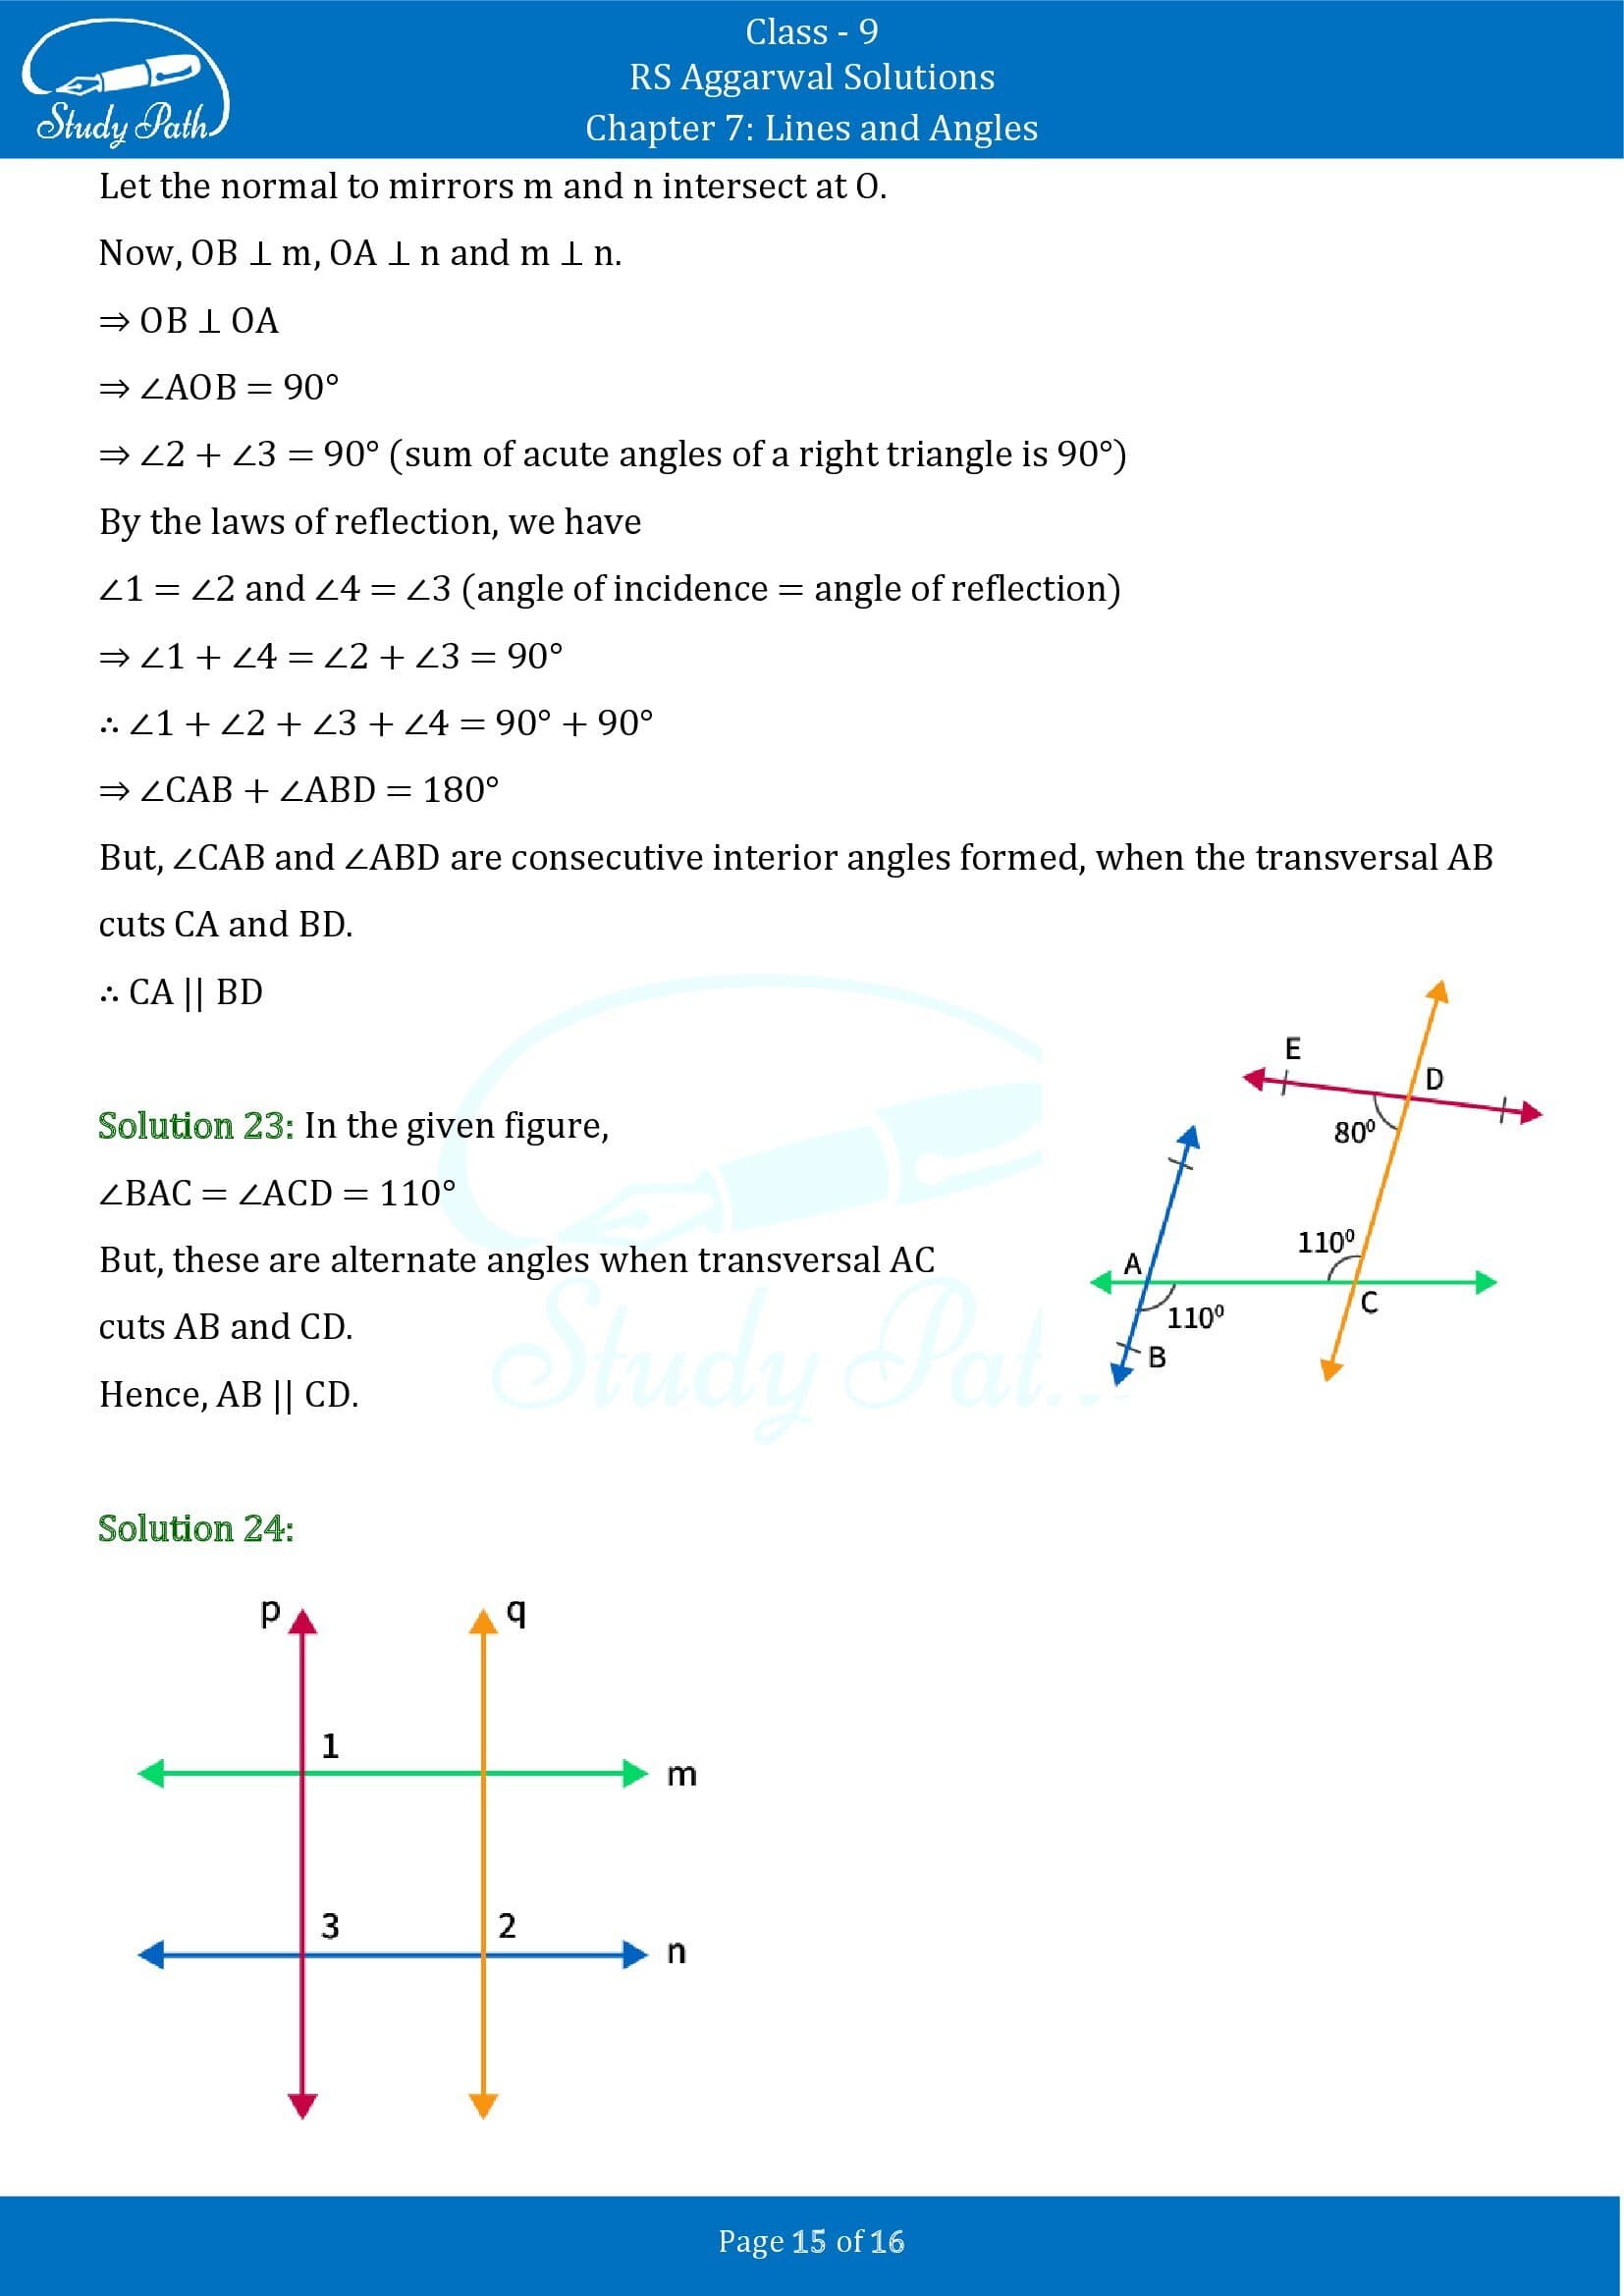 RS Aggarwal Solutions Class 9 Chapter 7 Lines and Angles Exercise 7C 00015